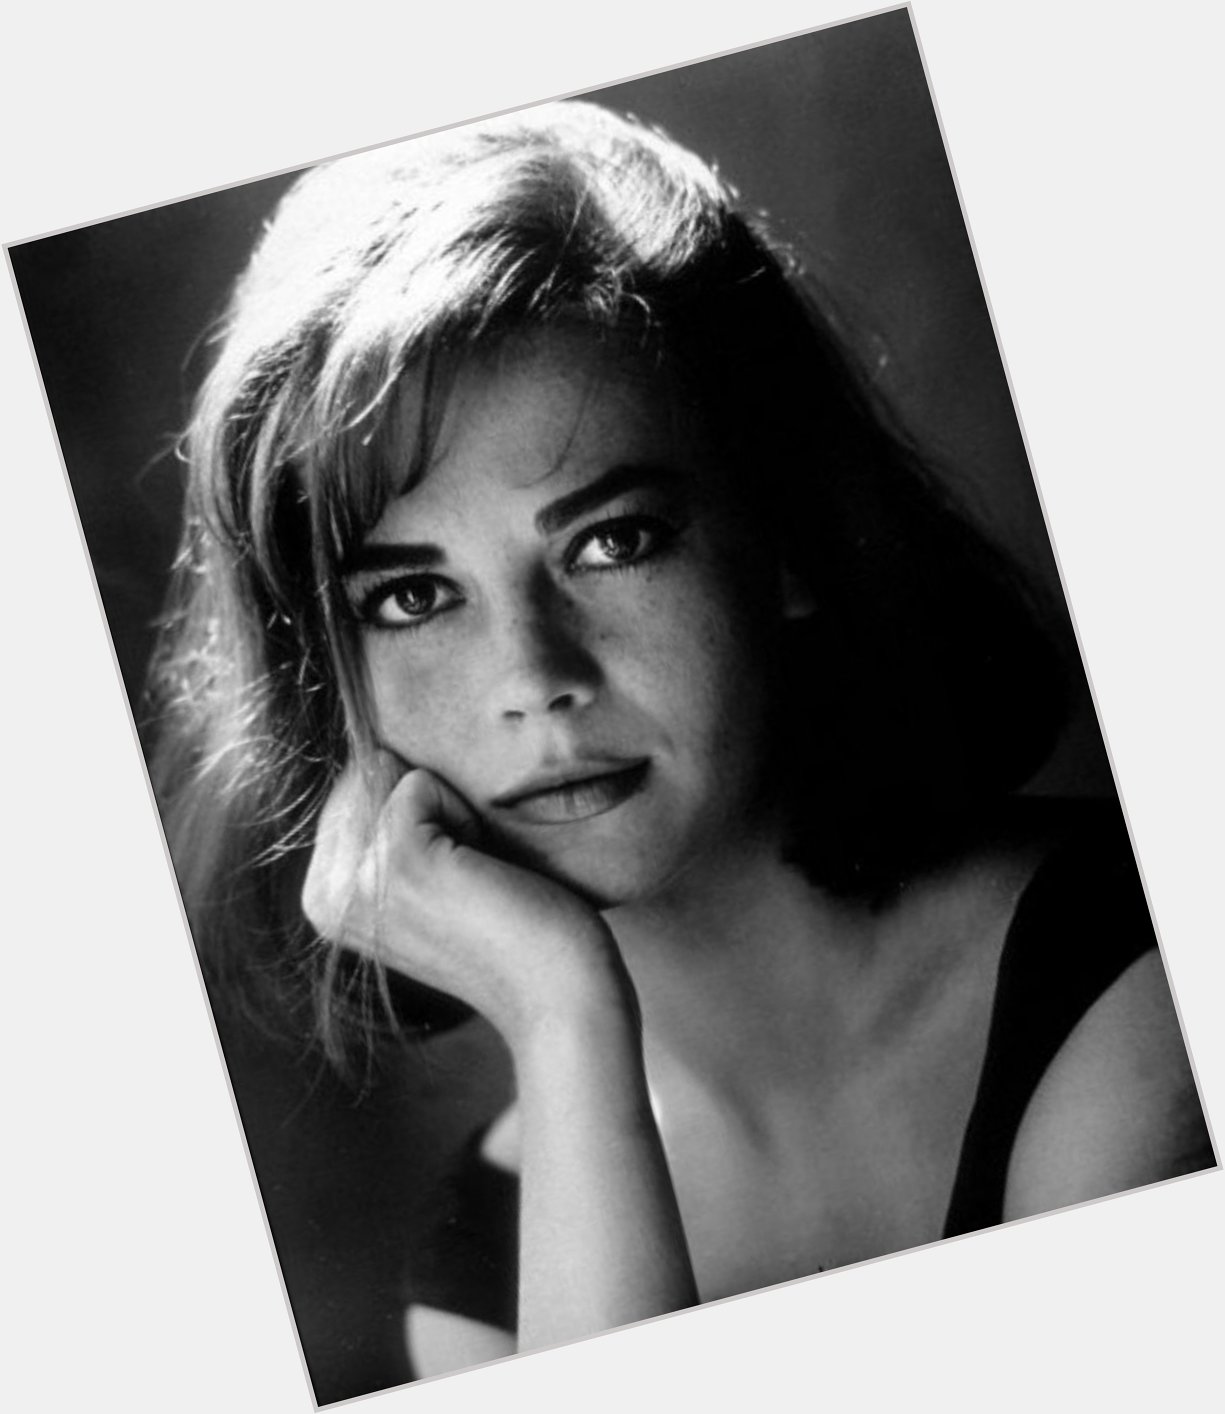 Happy Birthday to the wonderful Natalie Wood, who would have been 79 today! (1938-1981) 